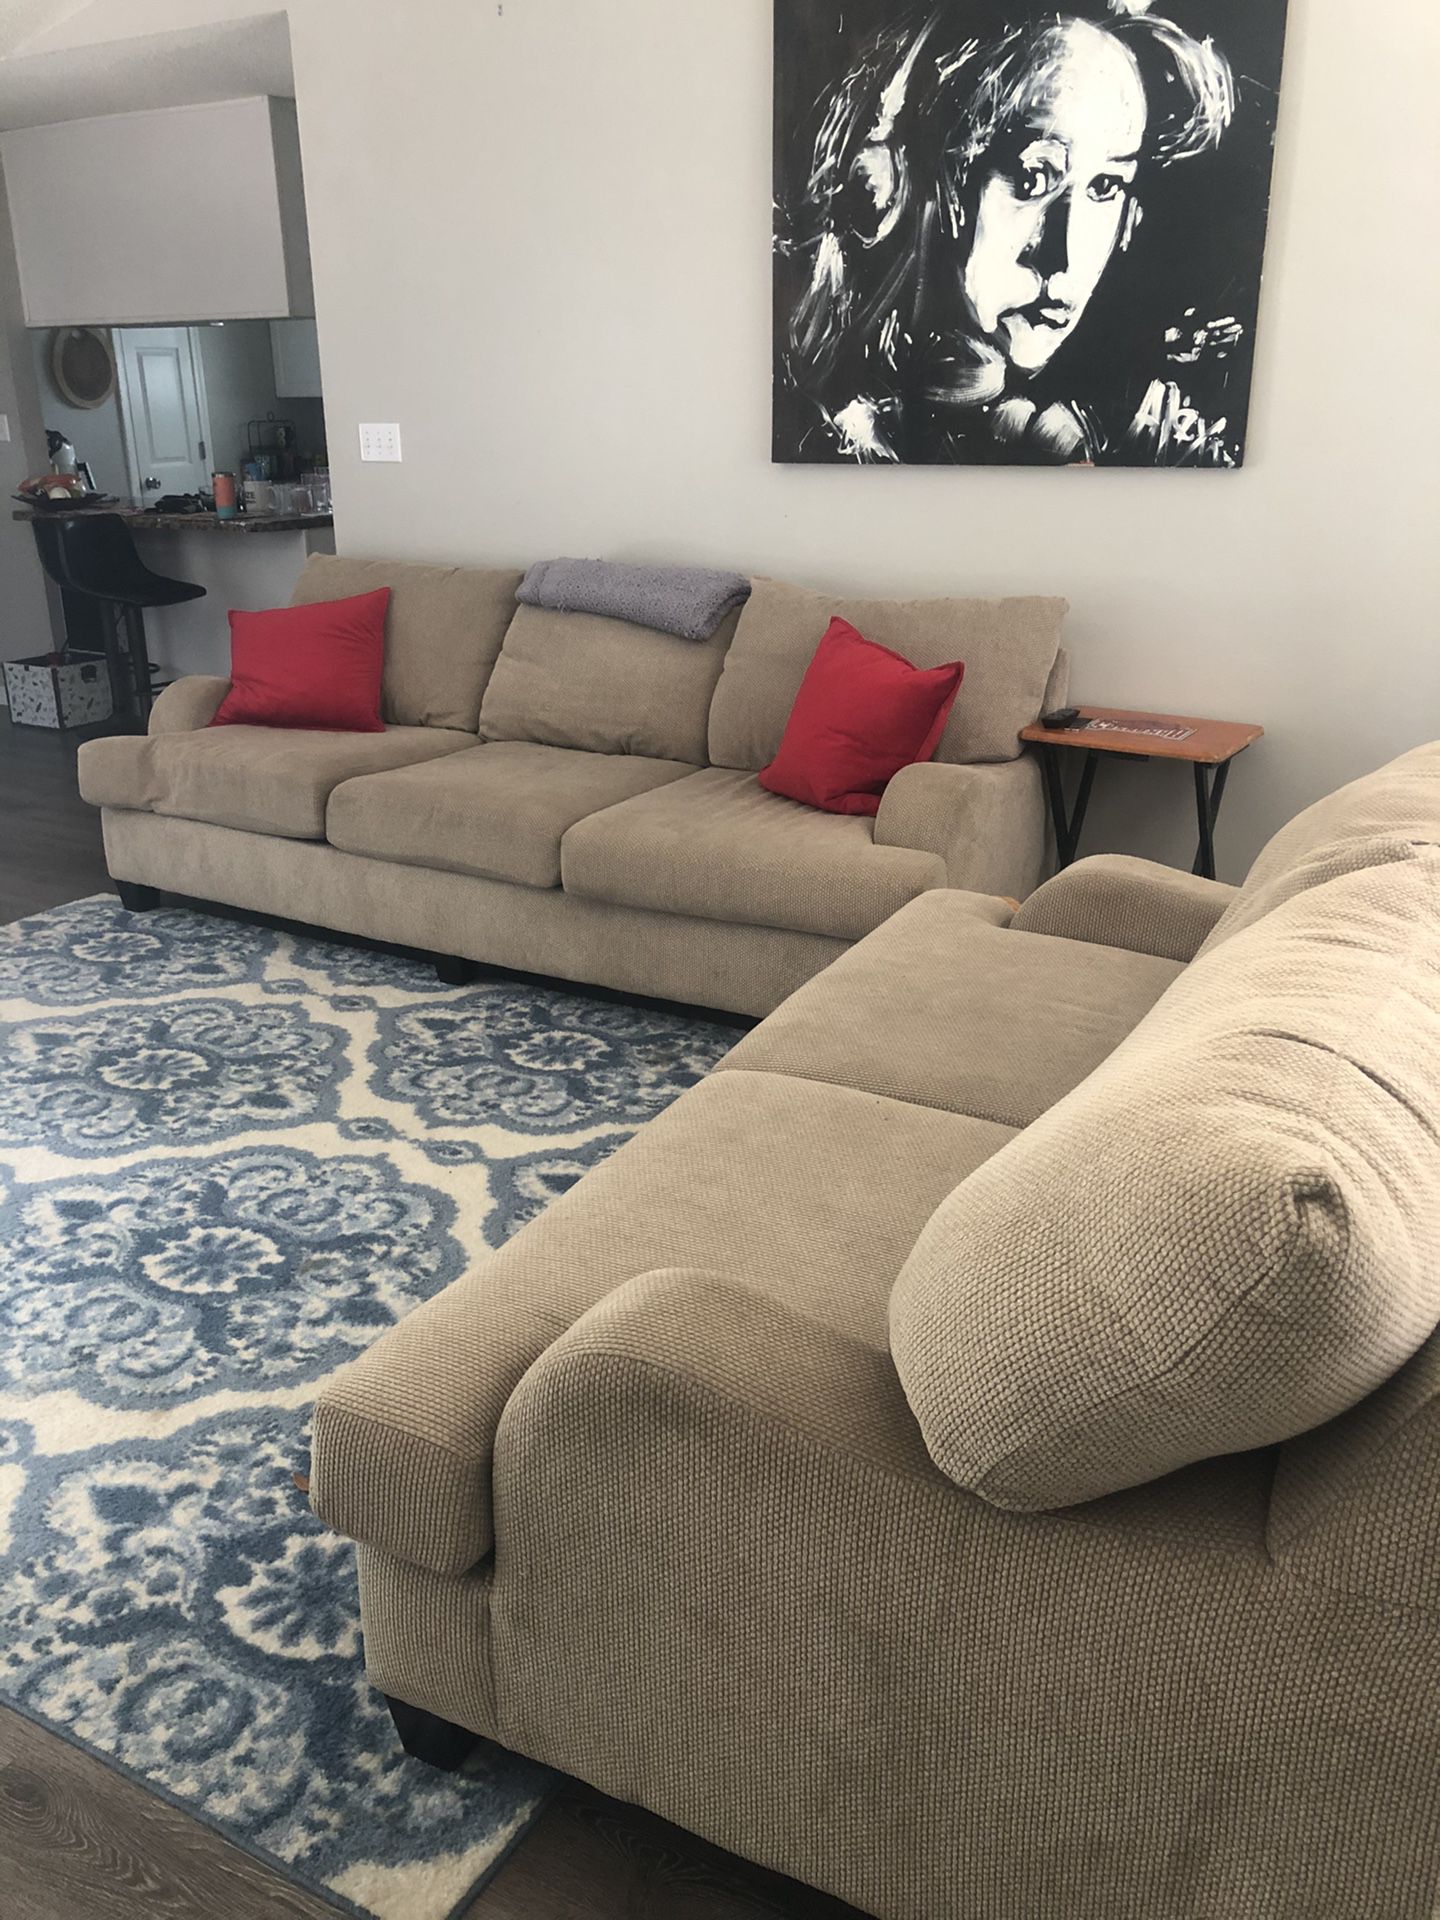 Tan couches for sale